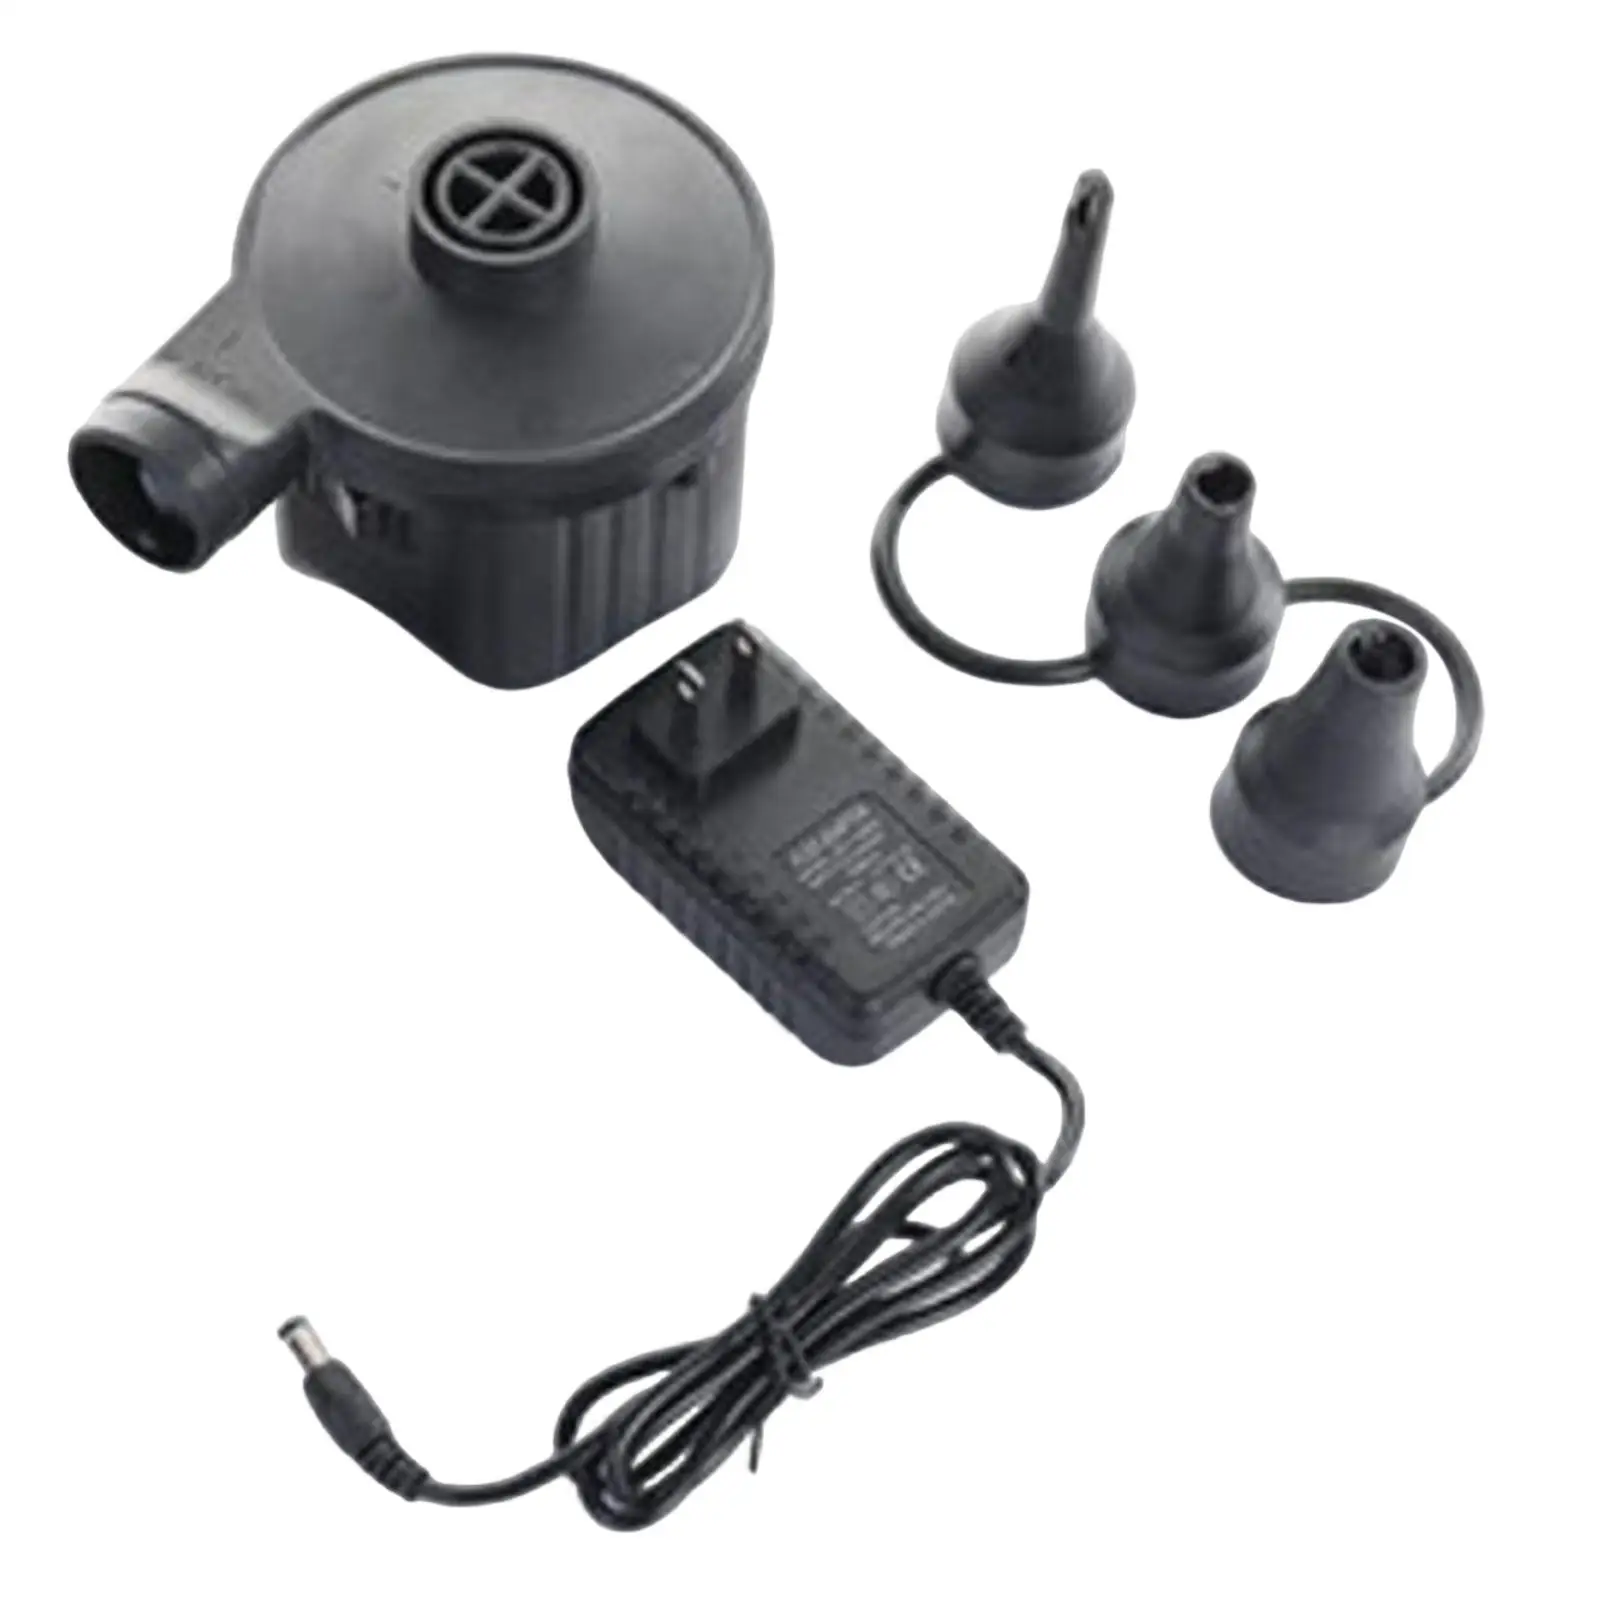 Electric Air Pump with 3 Nozzles for Pool Floats Toy Inflatable Cushions